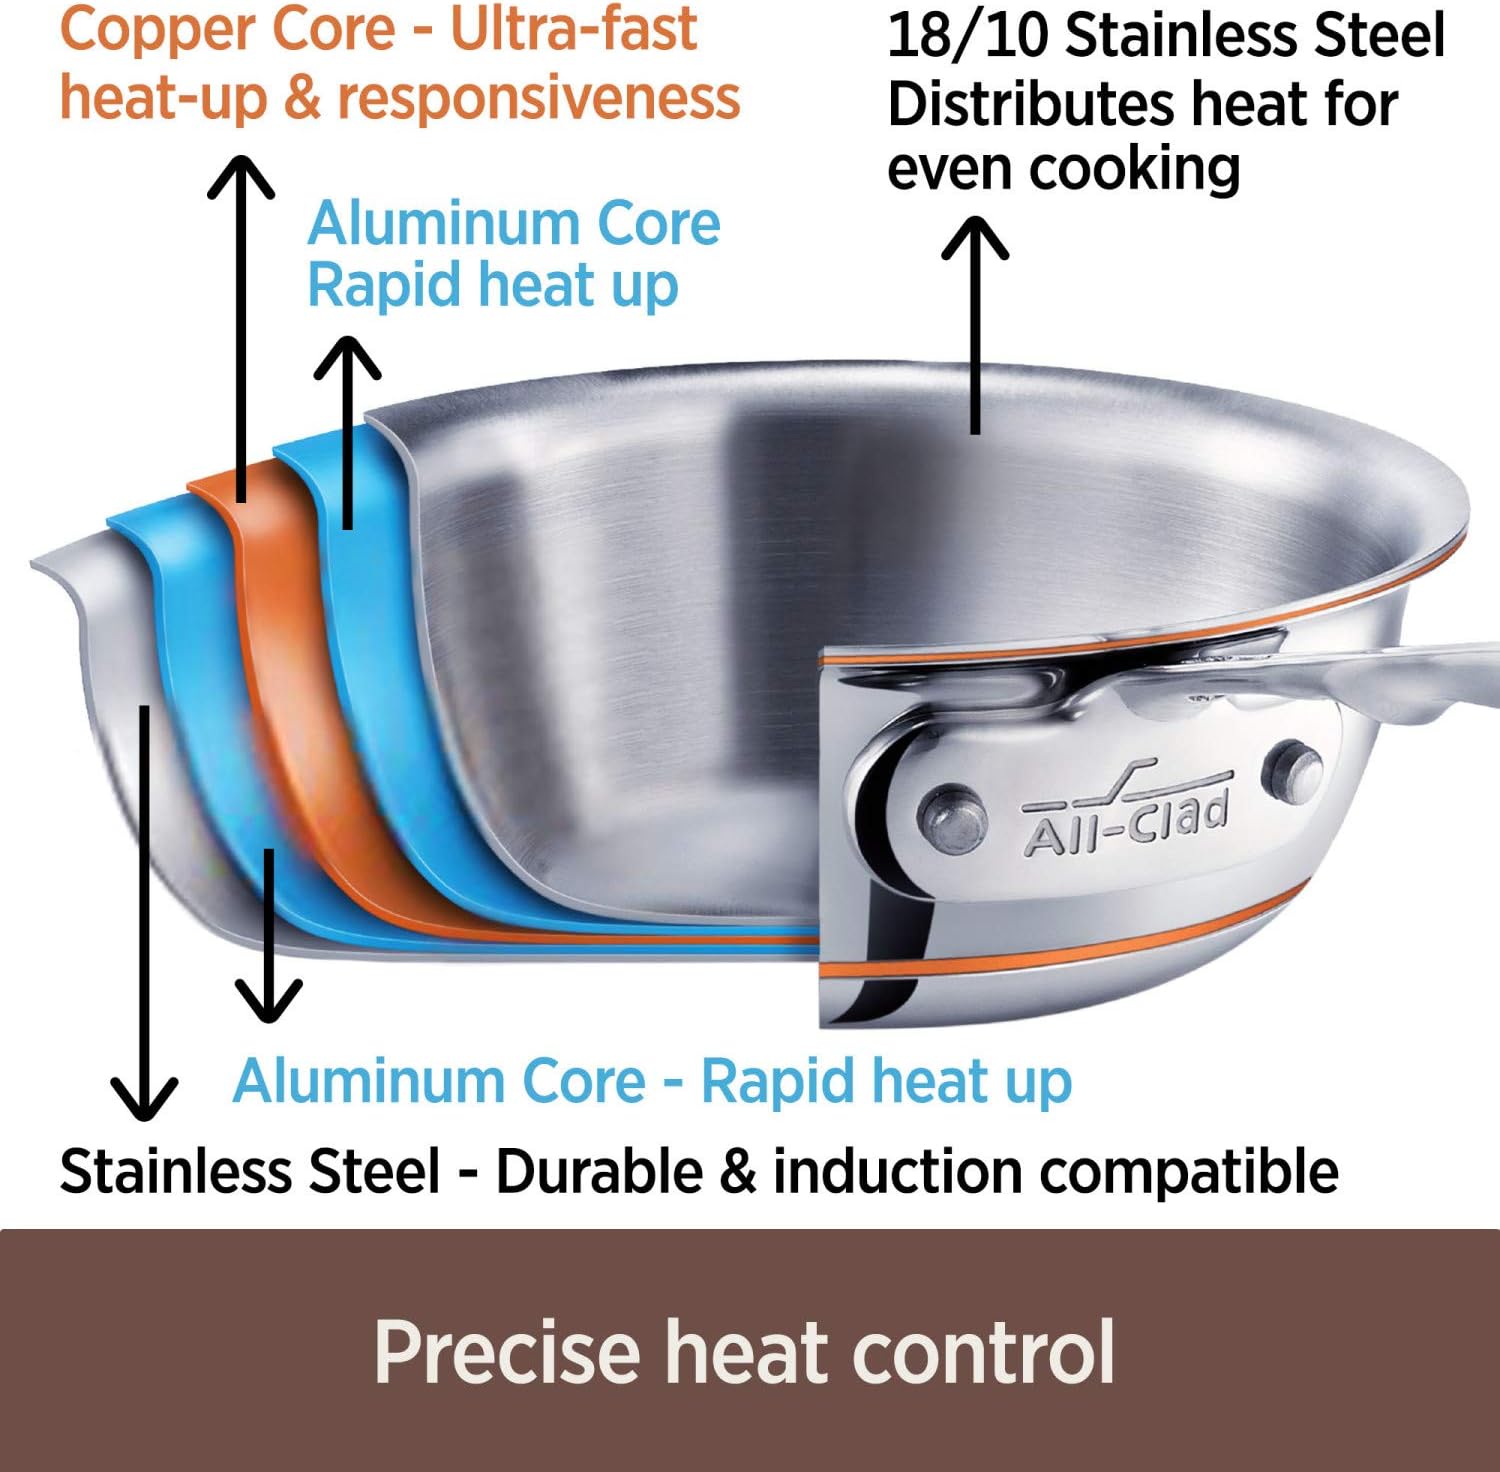 Made In Cookware - 8-inch Stainless Steel Frying Pan - 5 Ply Stainless Clad